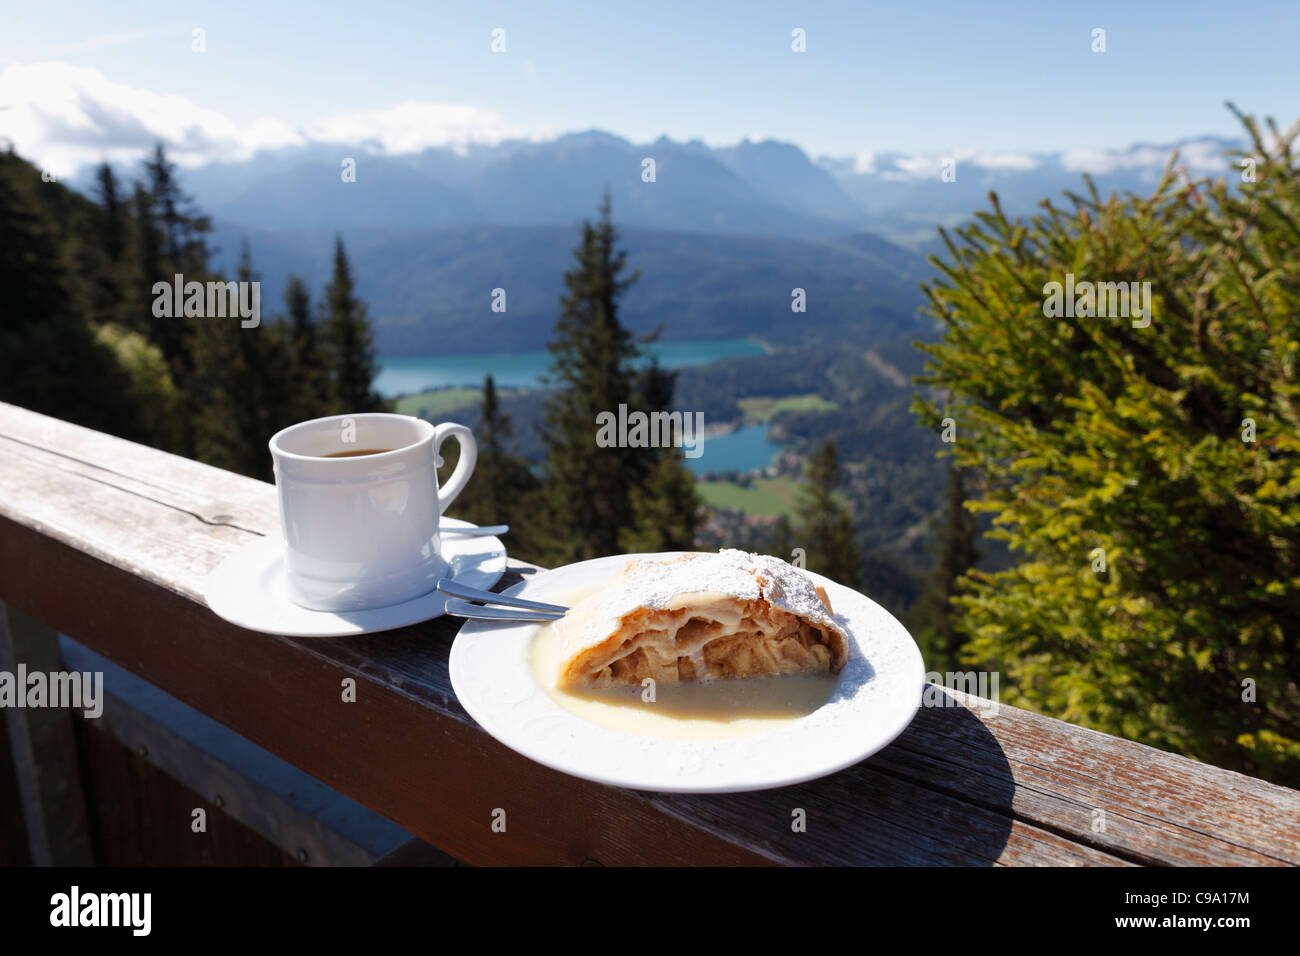 Germany, Bavaria, Upper Bavaria, Apple strudel and coffee cup on fence with mountains in background Stock Photo